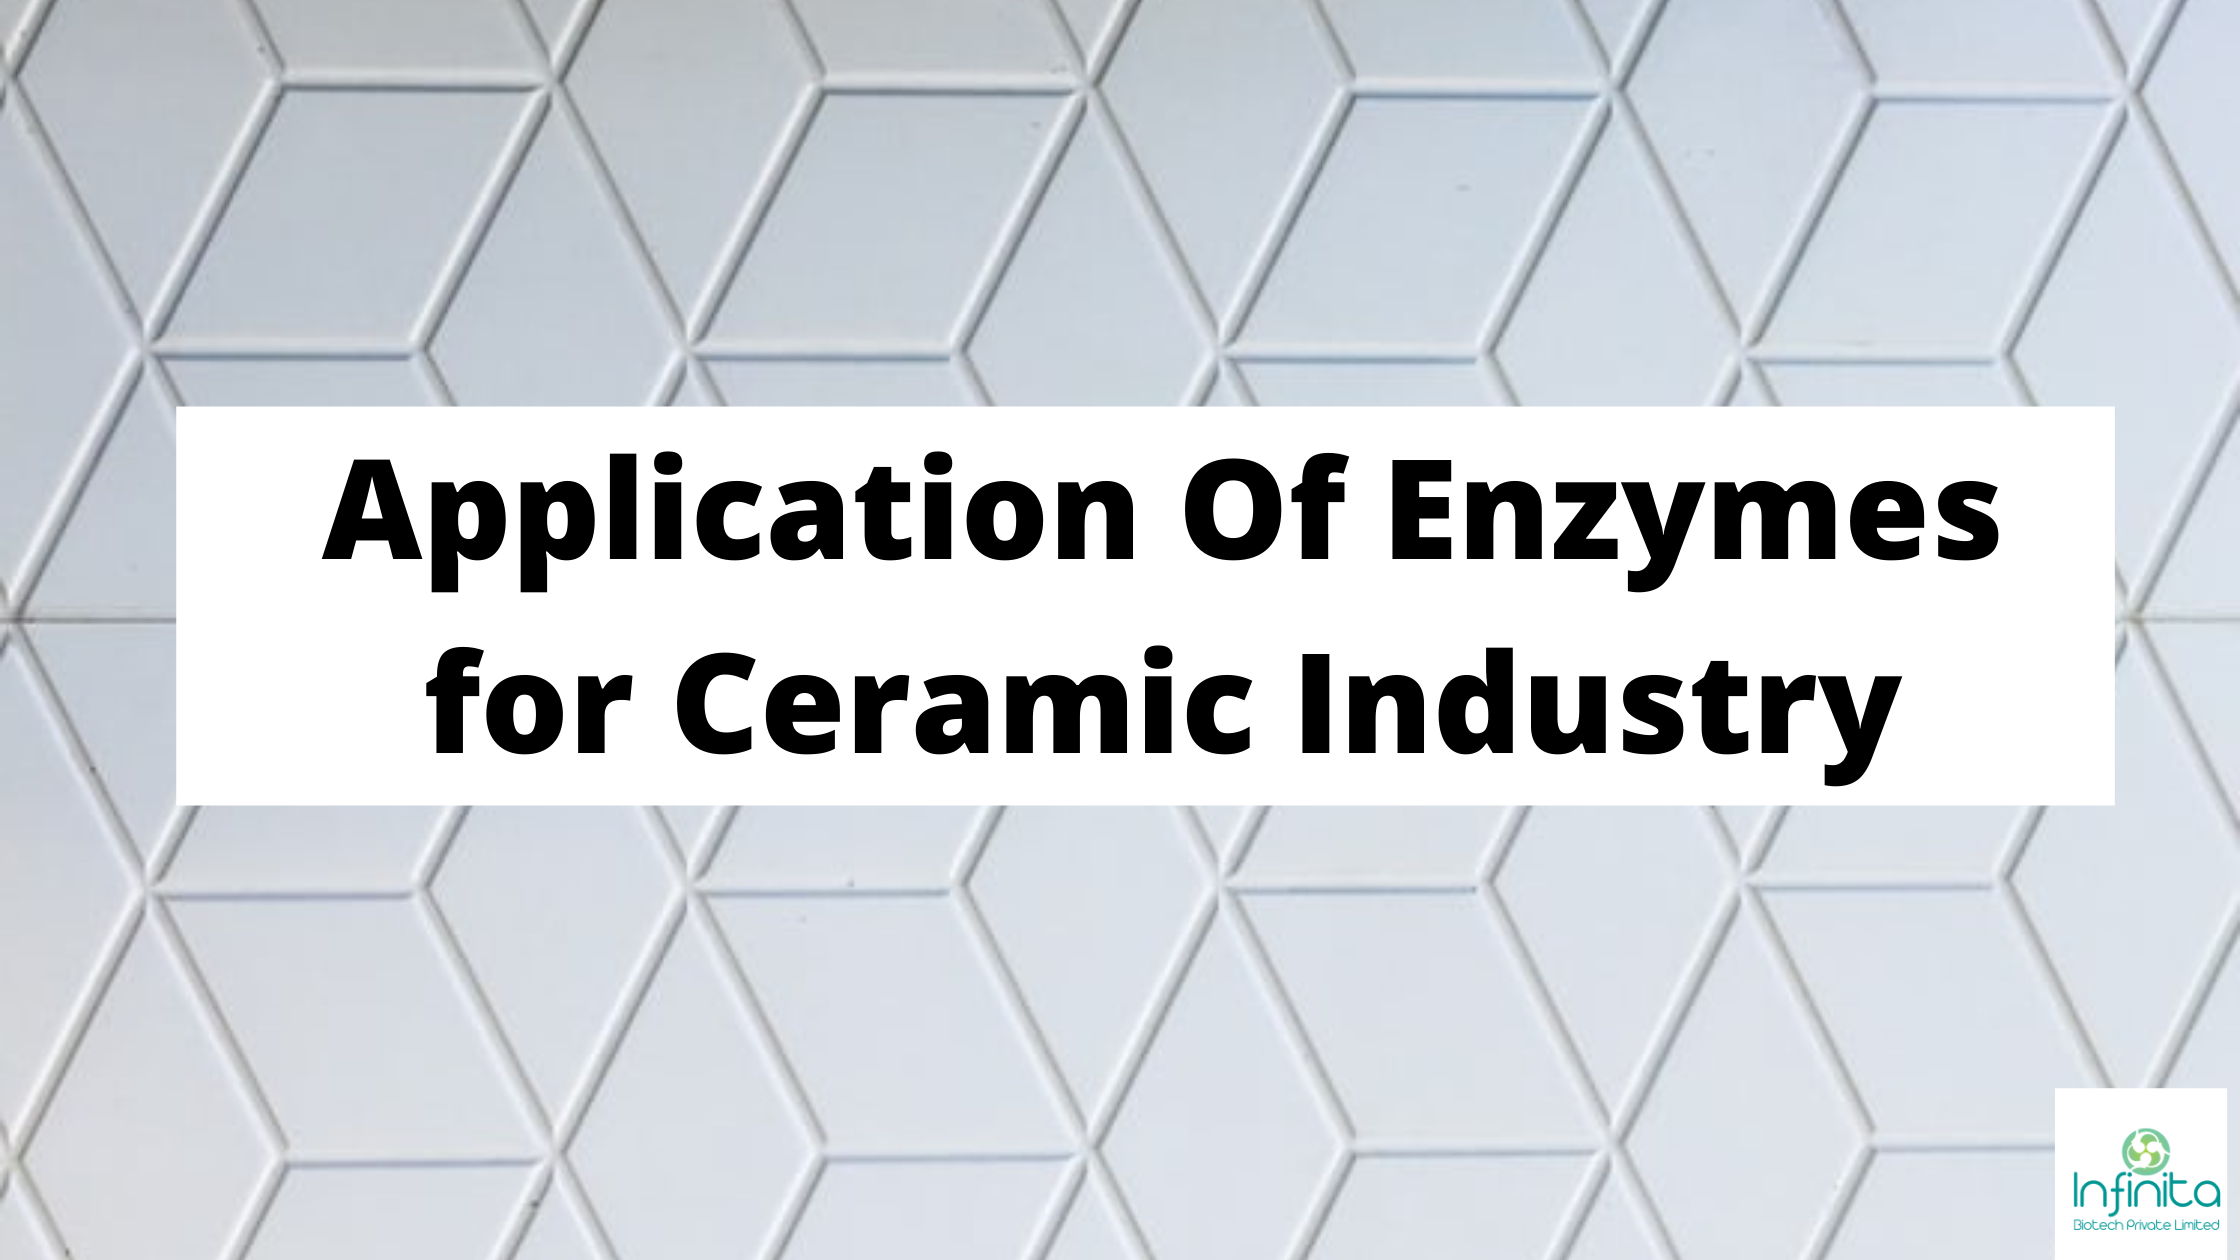 Application Of Enzymes for Ceramic Industry